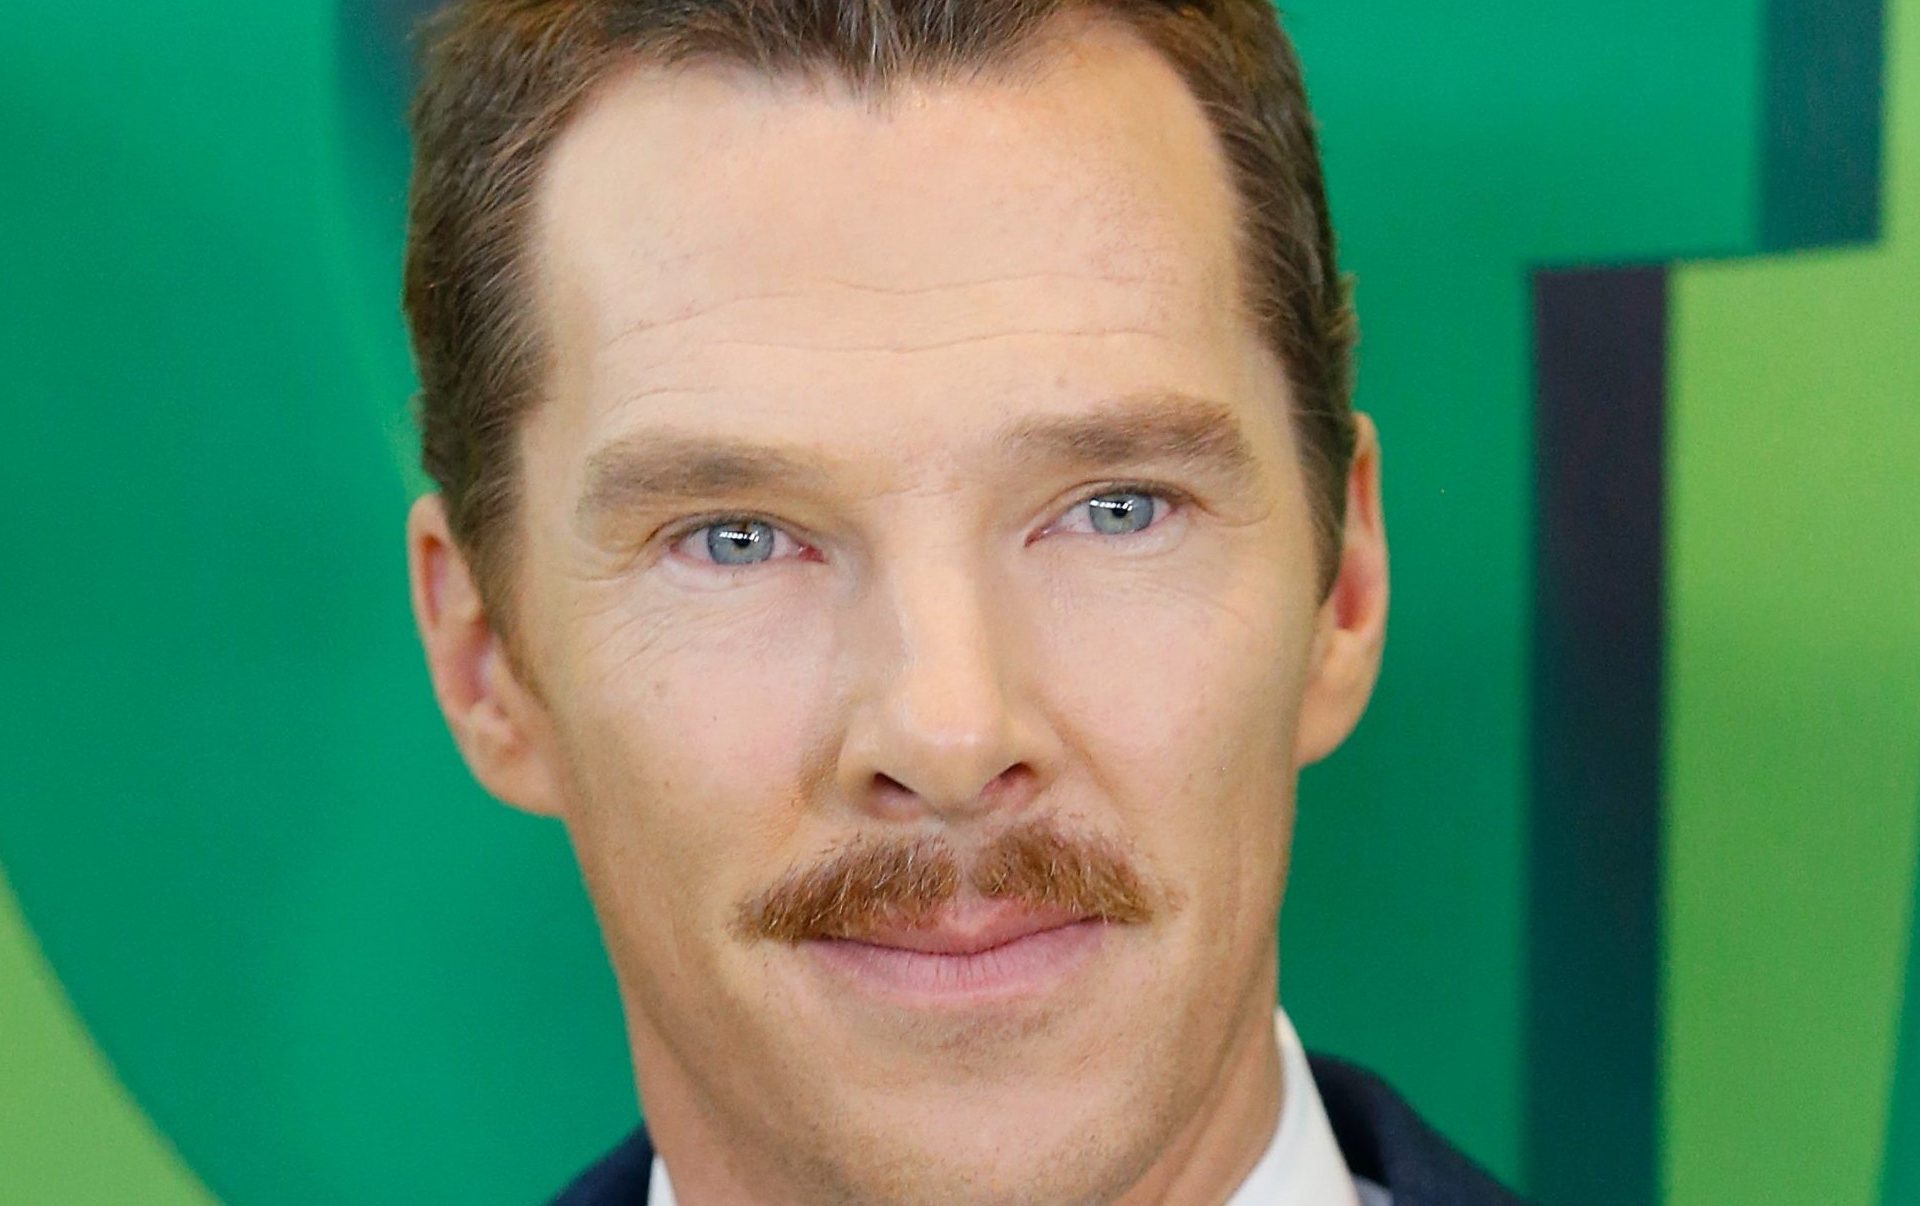 Should Benedict Cumberbatch pay reparations for his family's slave business?